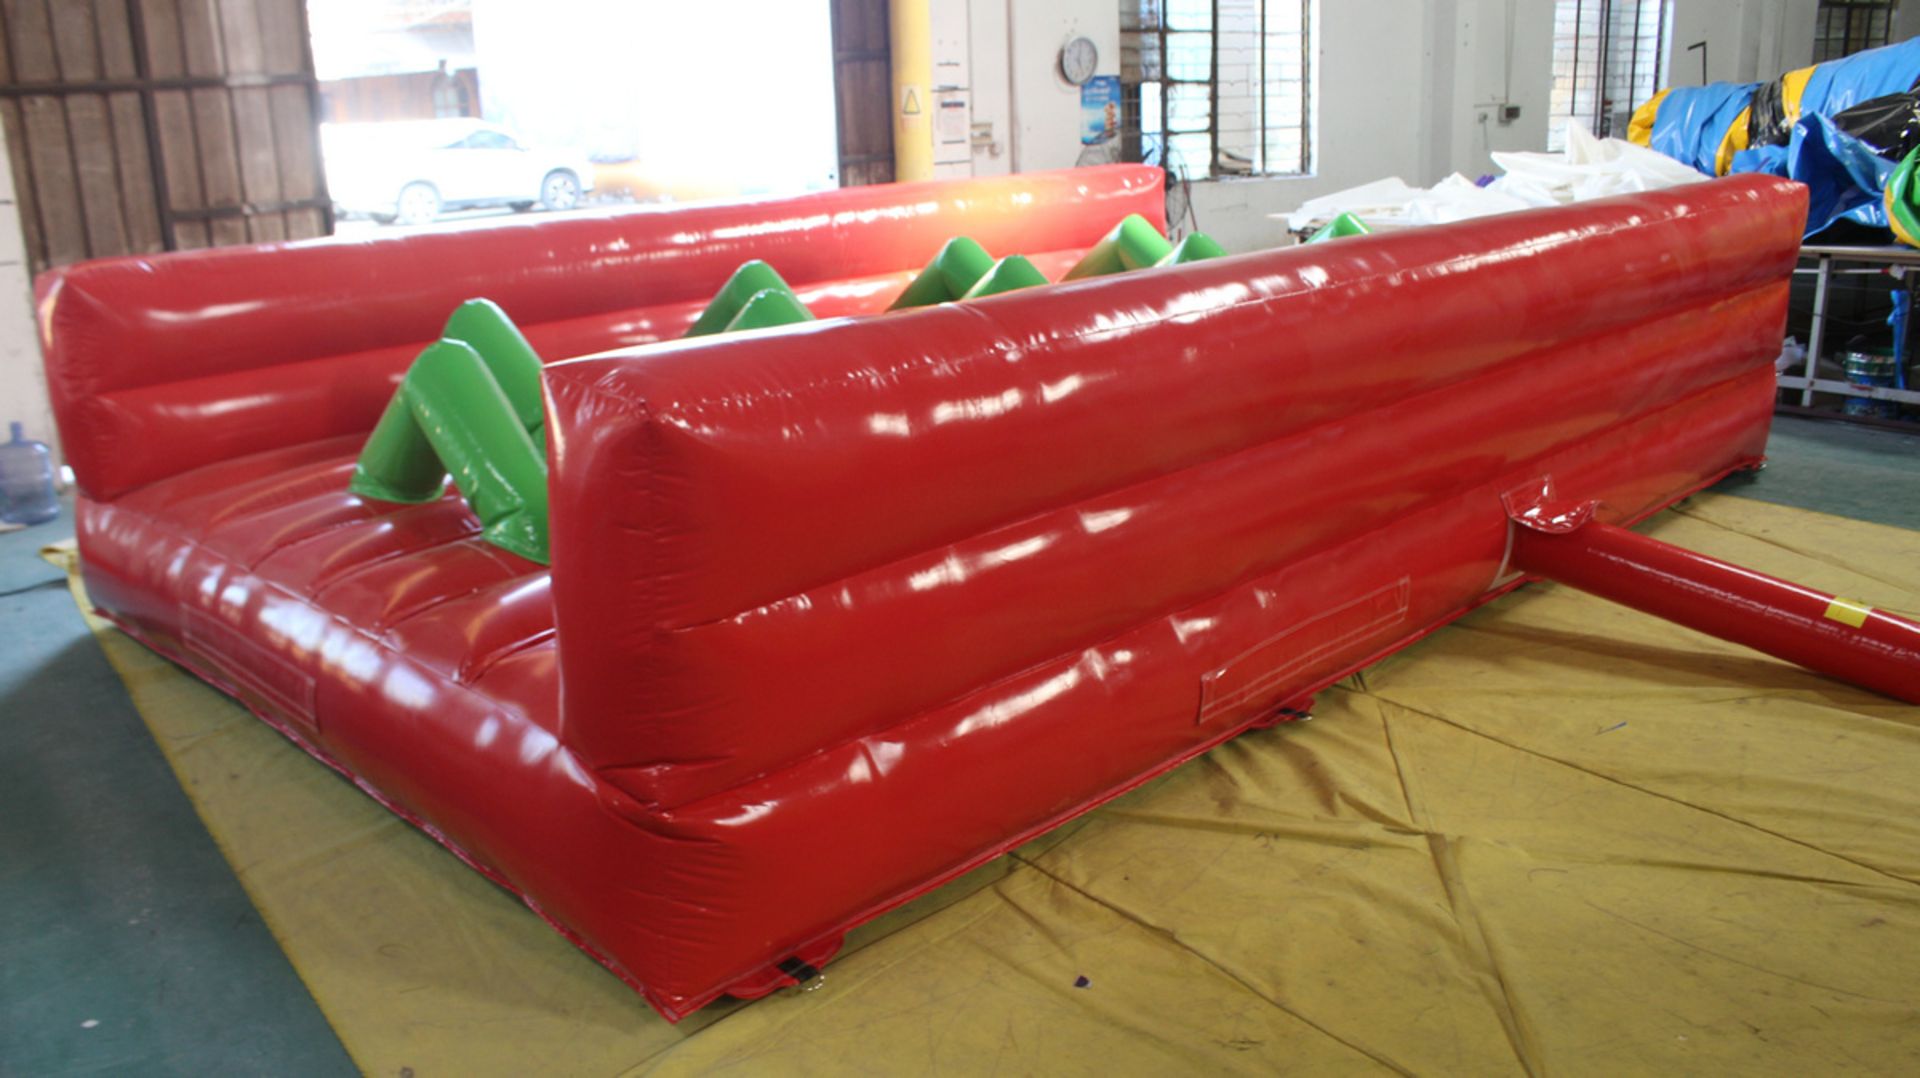 8 Assorted inflatables, unused, including SP-G1 Fl - Image 9 of 23